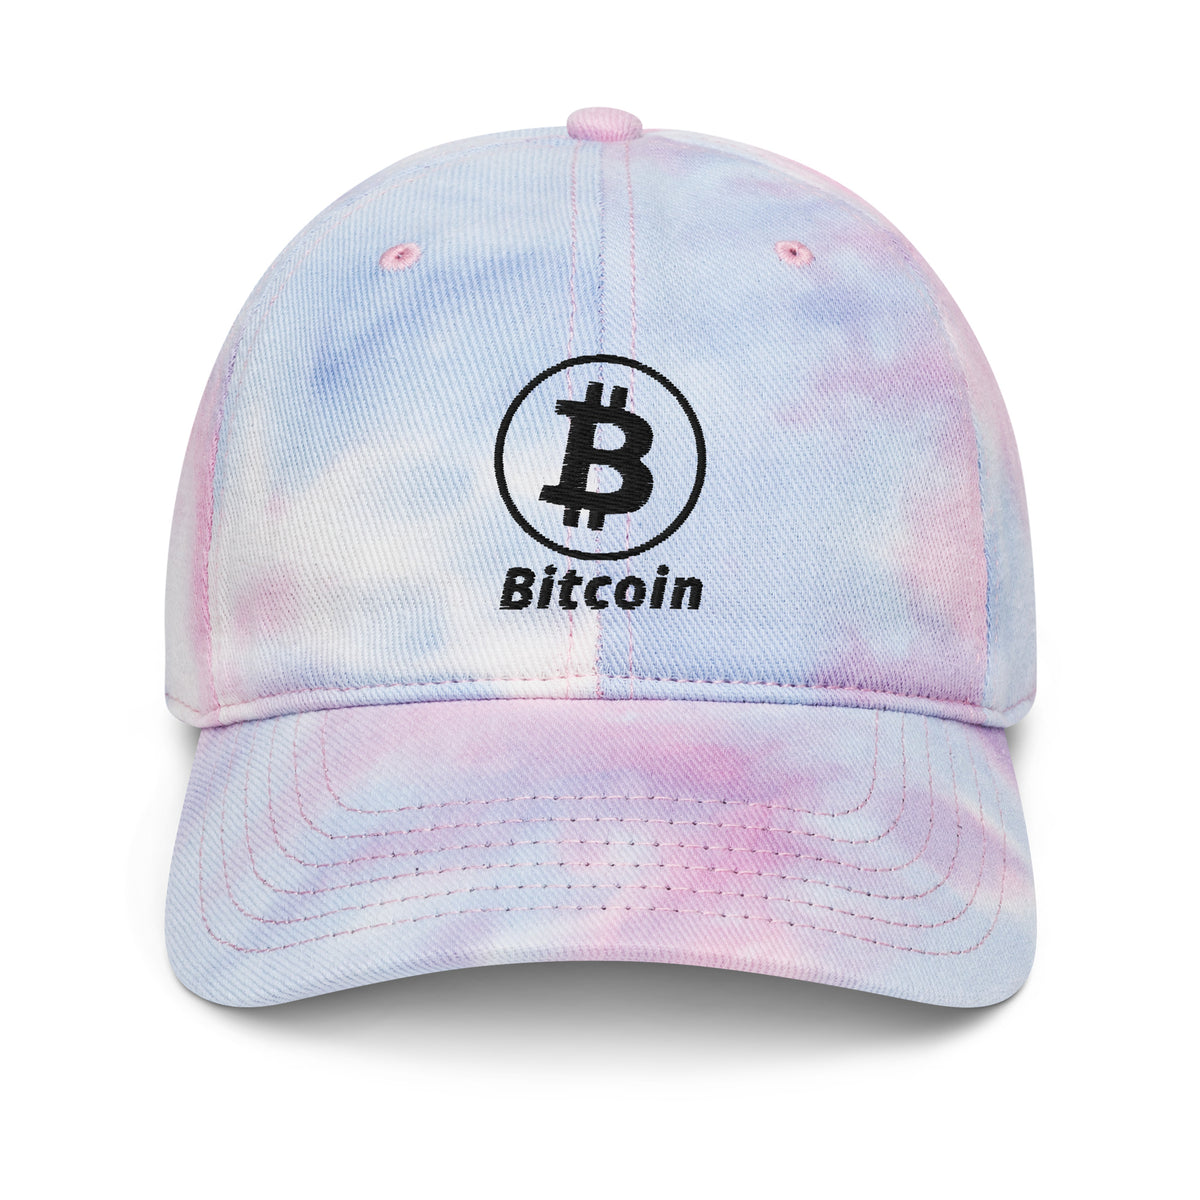 Bitcoin B Circle Logo With Text (Black Embroidery) Tie Dye Hat - fomo21